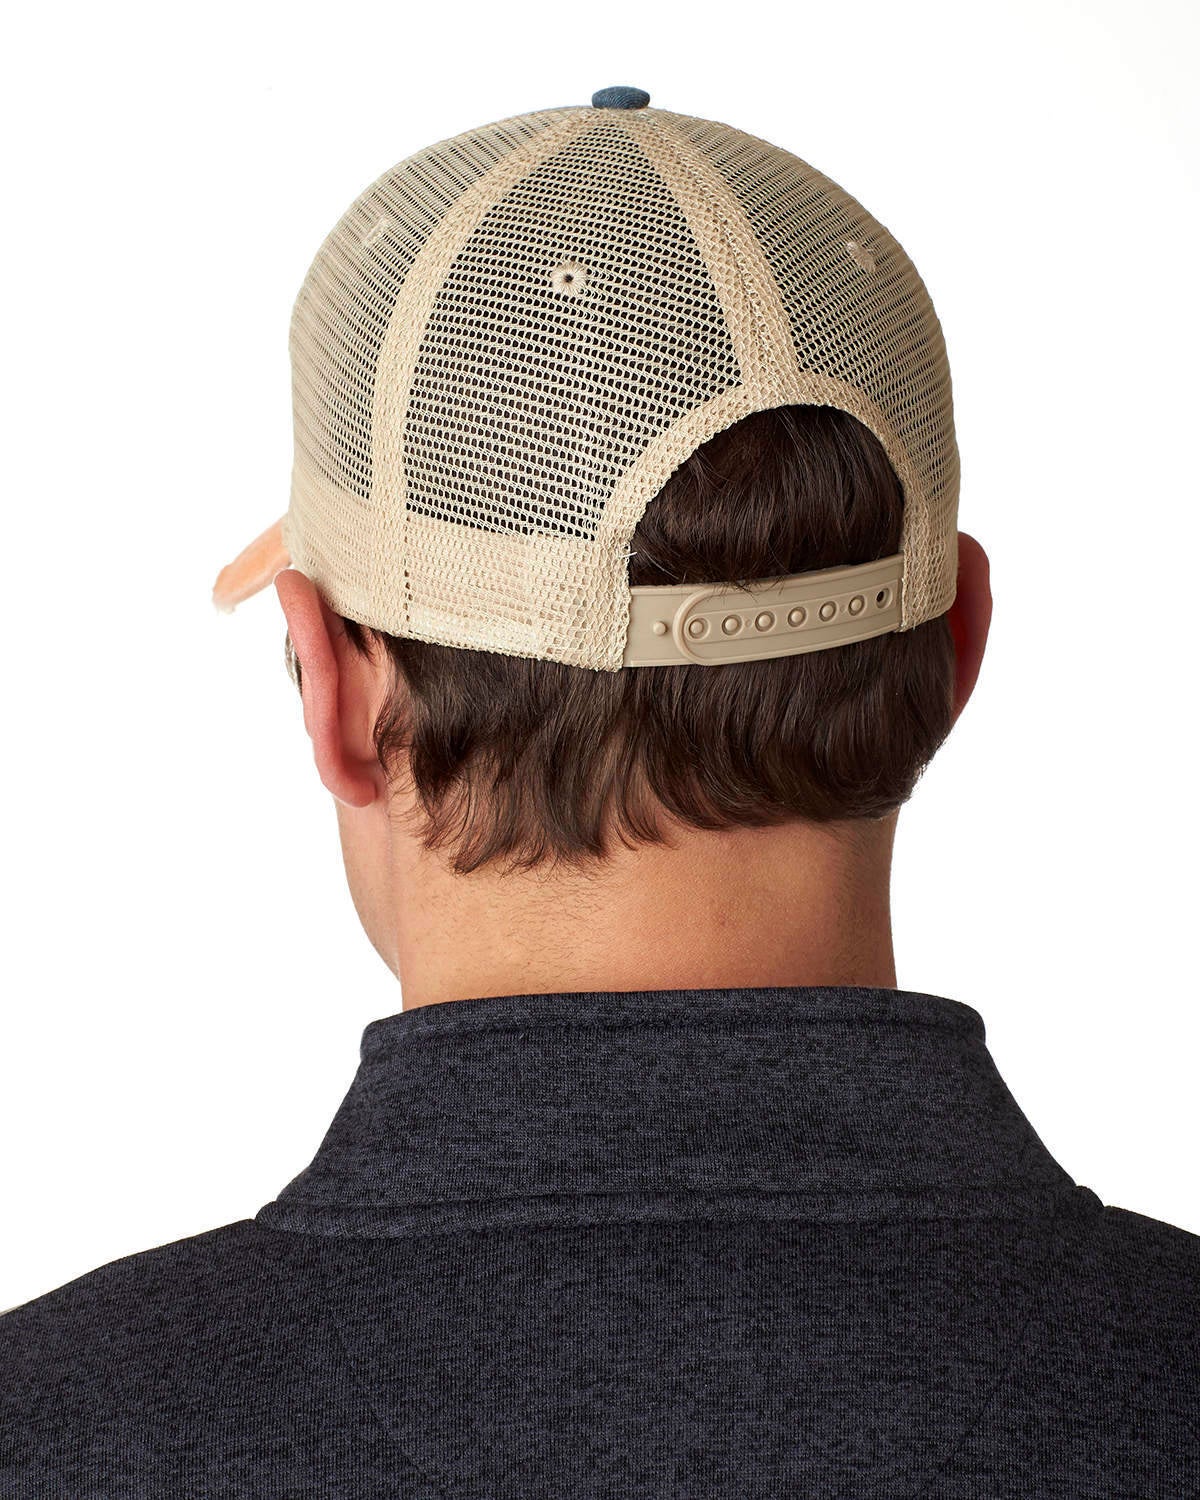 Mississippi Hat - Distressed Snapback Trucker Hat - Mississippi State Outline - Many Colors Available